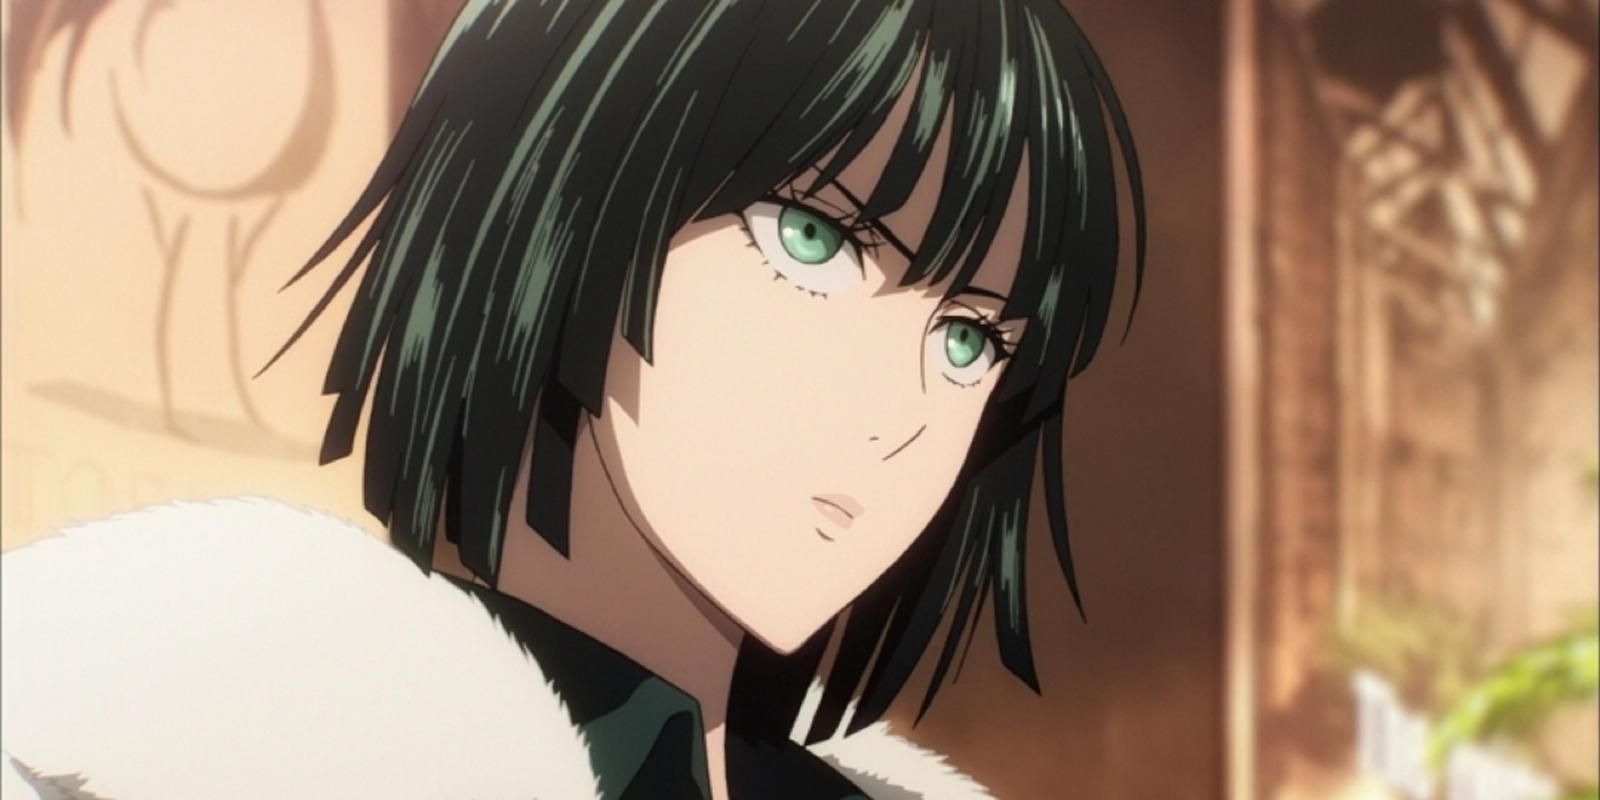 Fubuki from One-Punch Man with green eyes, staring off.